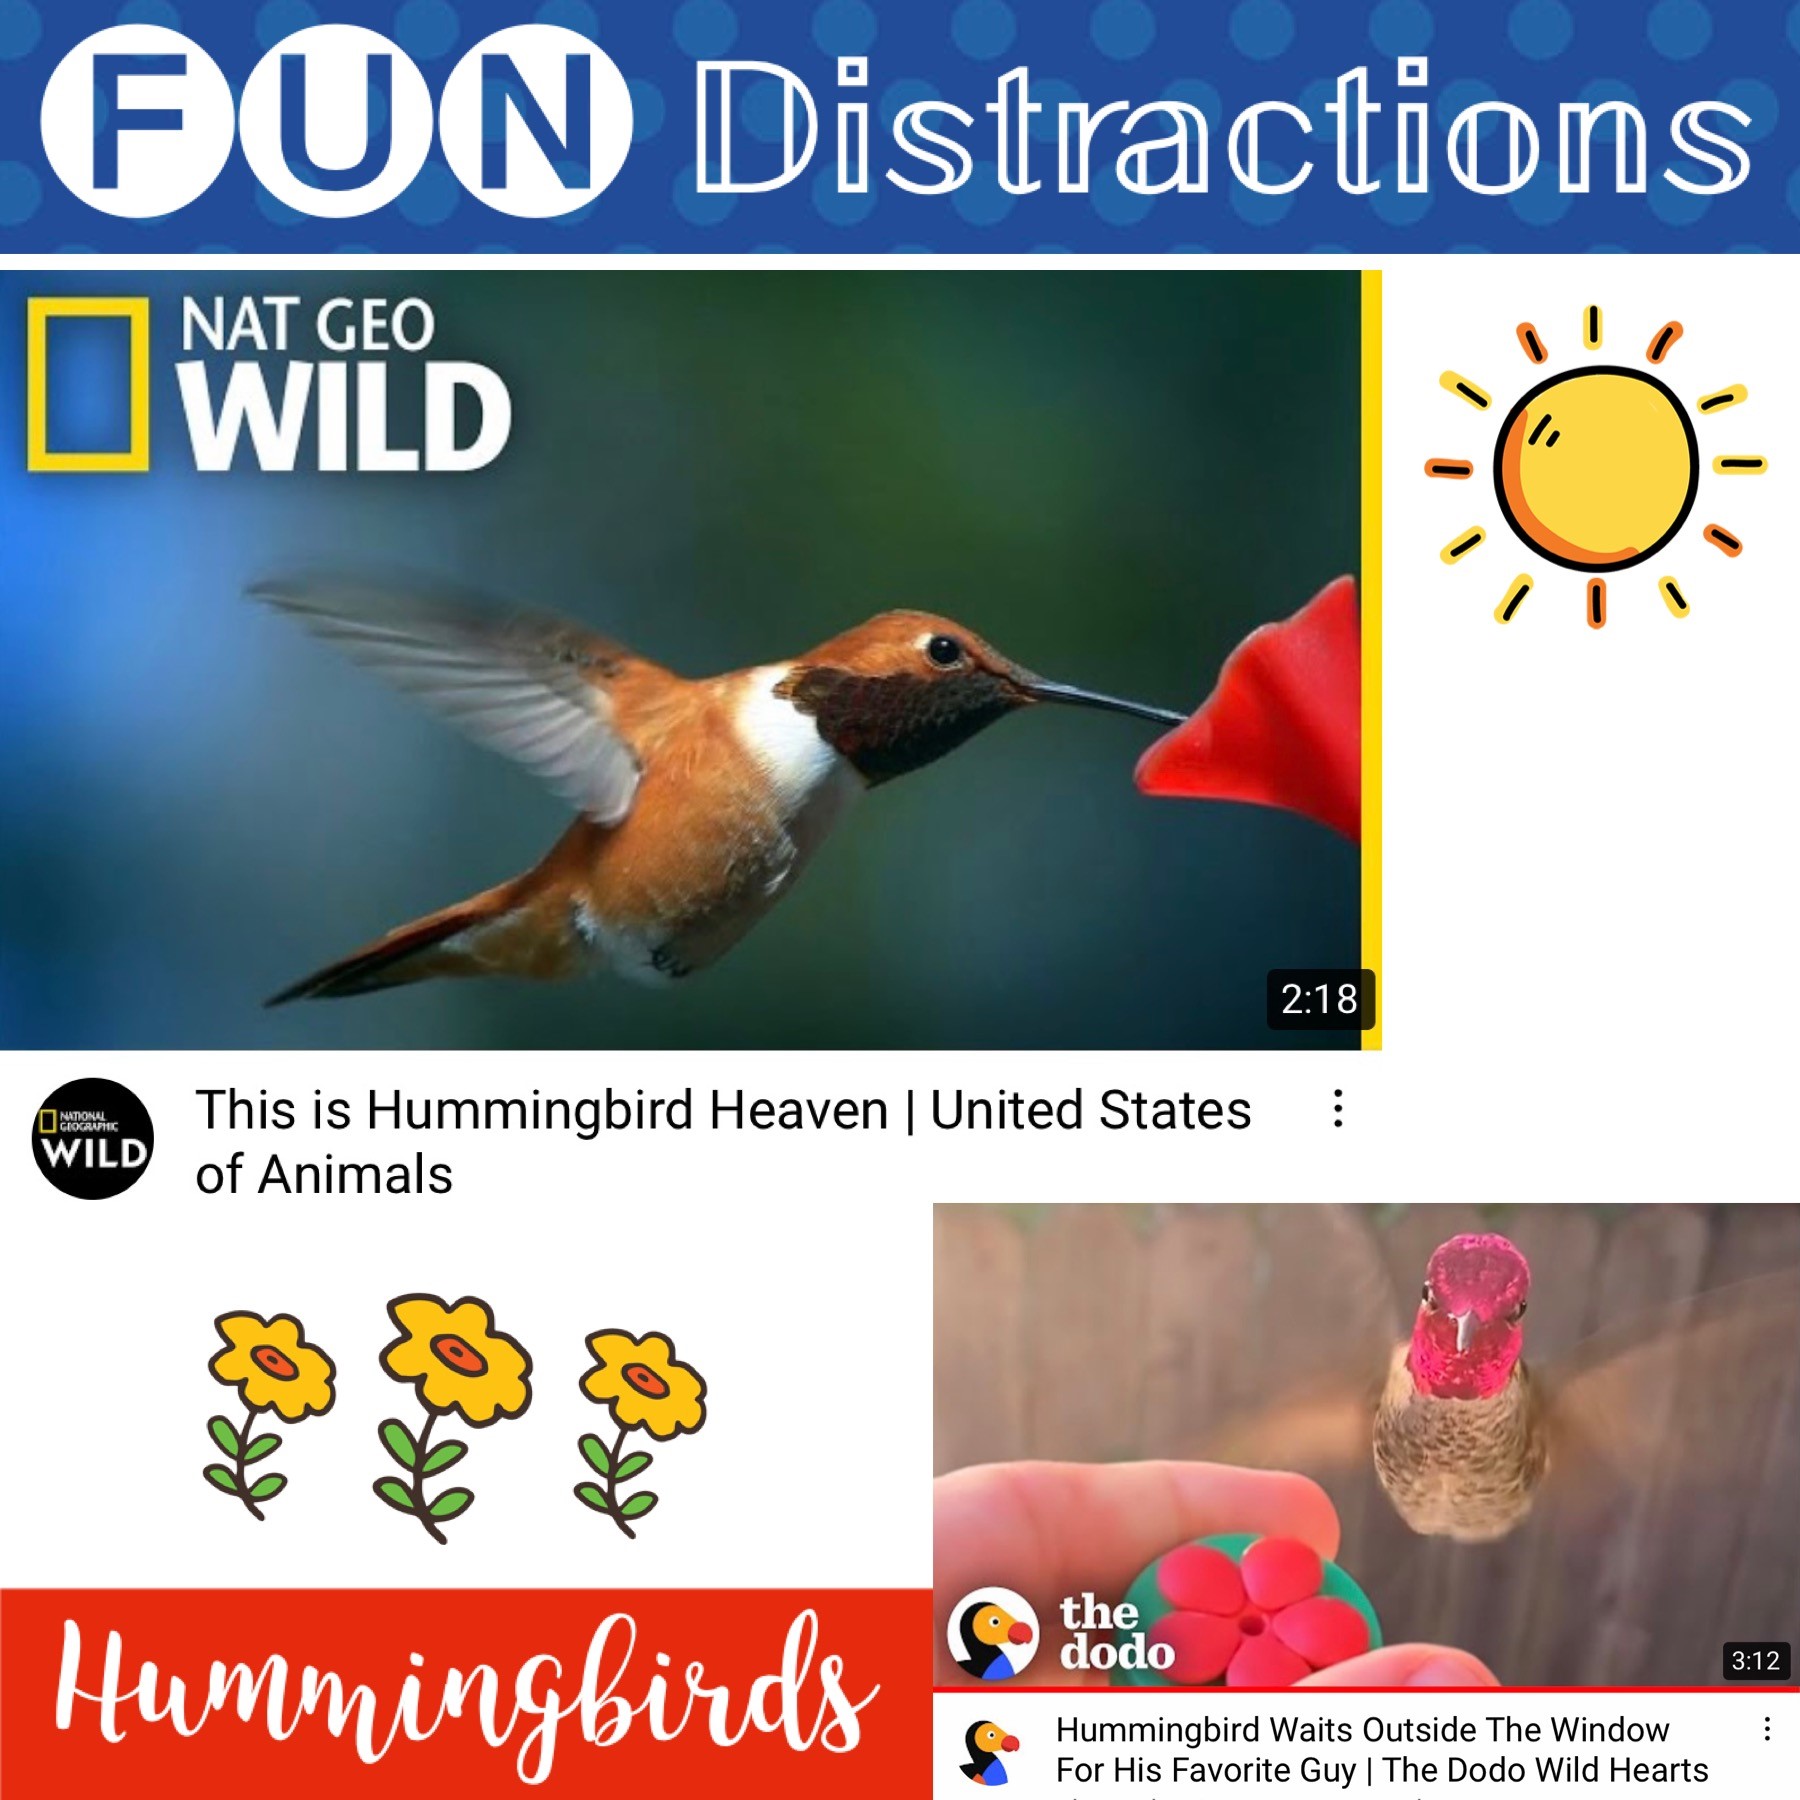 Images of hummingbirds